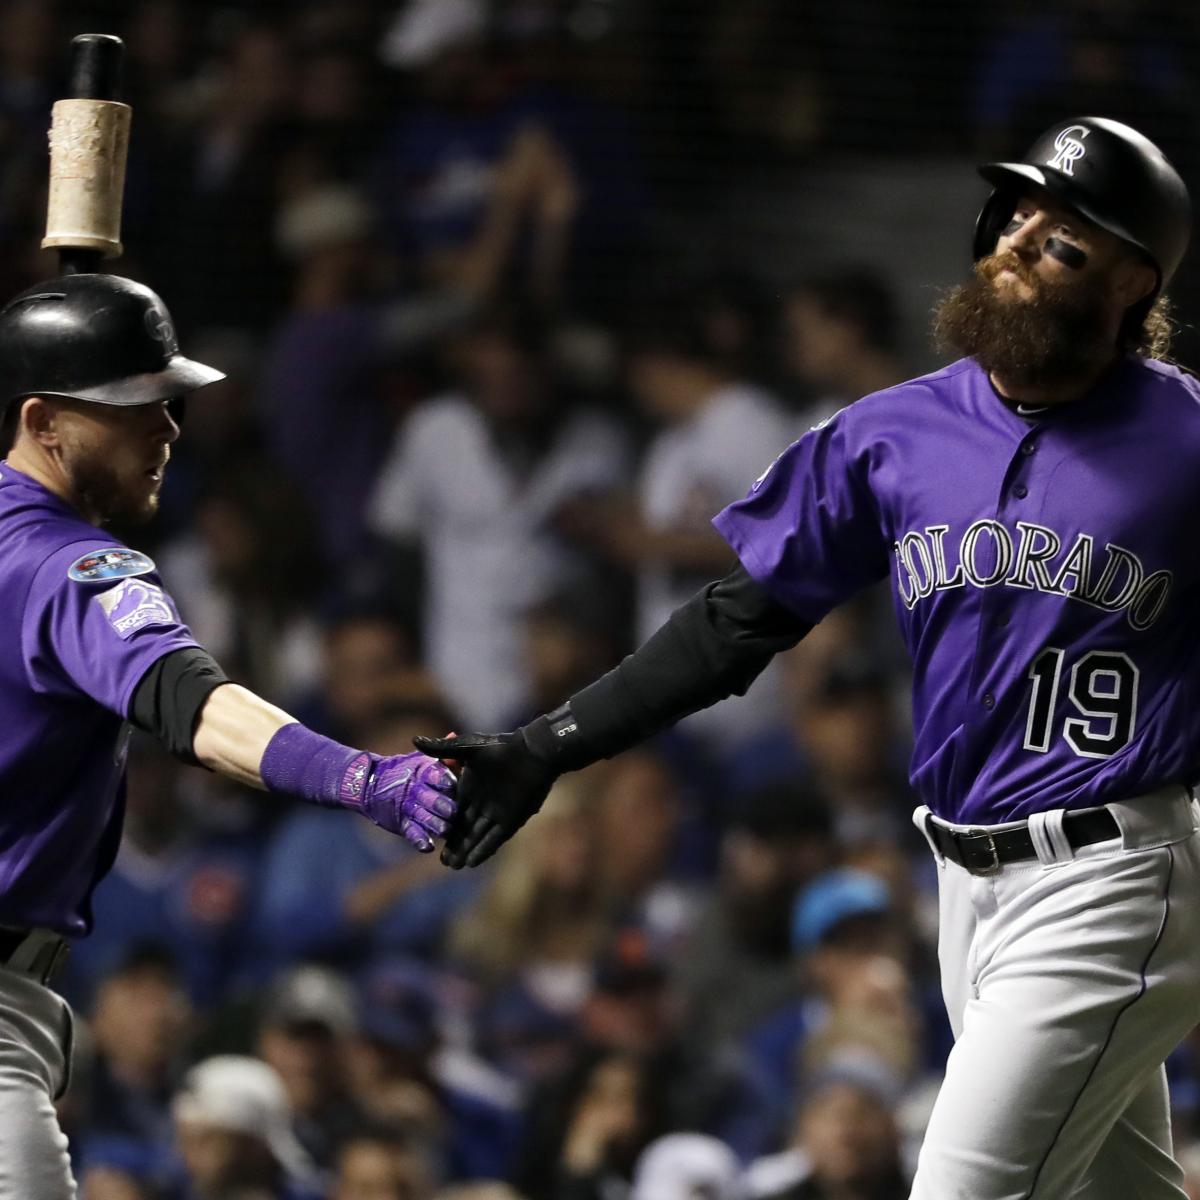 Rockies vs. Cubs results: Rockies score in 13th, oust Cubs in NL